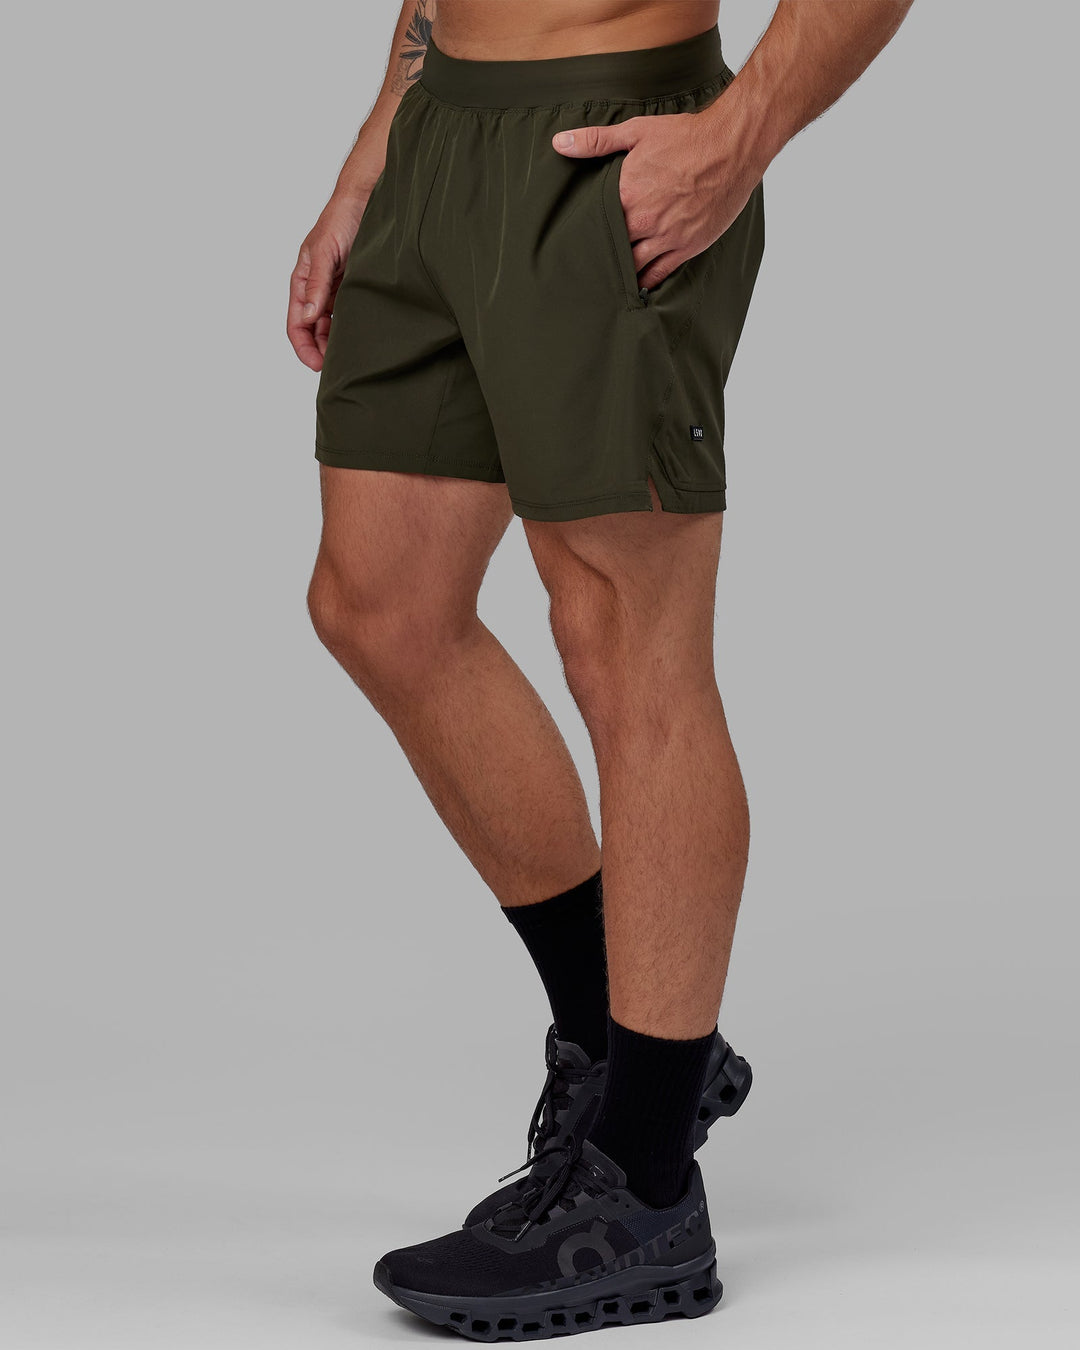 Man wearing Challenger 6" Lined Performance Short - Forest Night